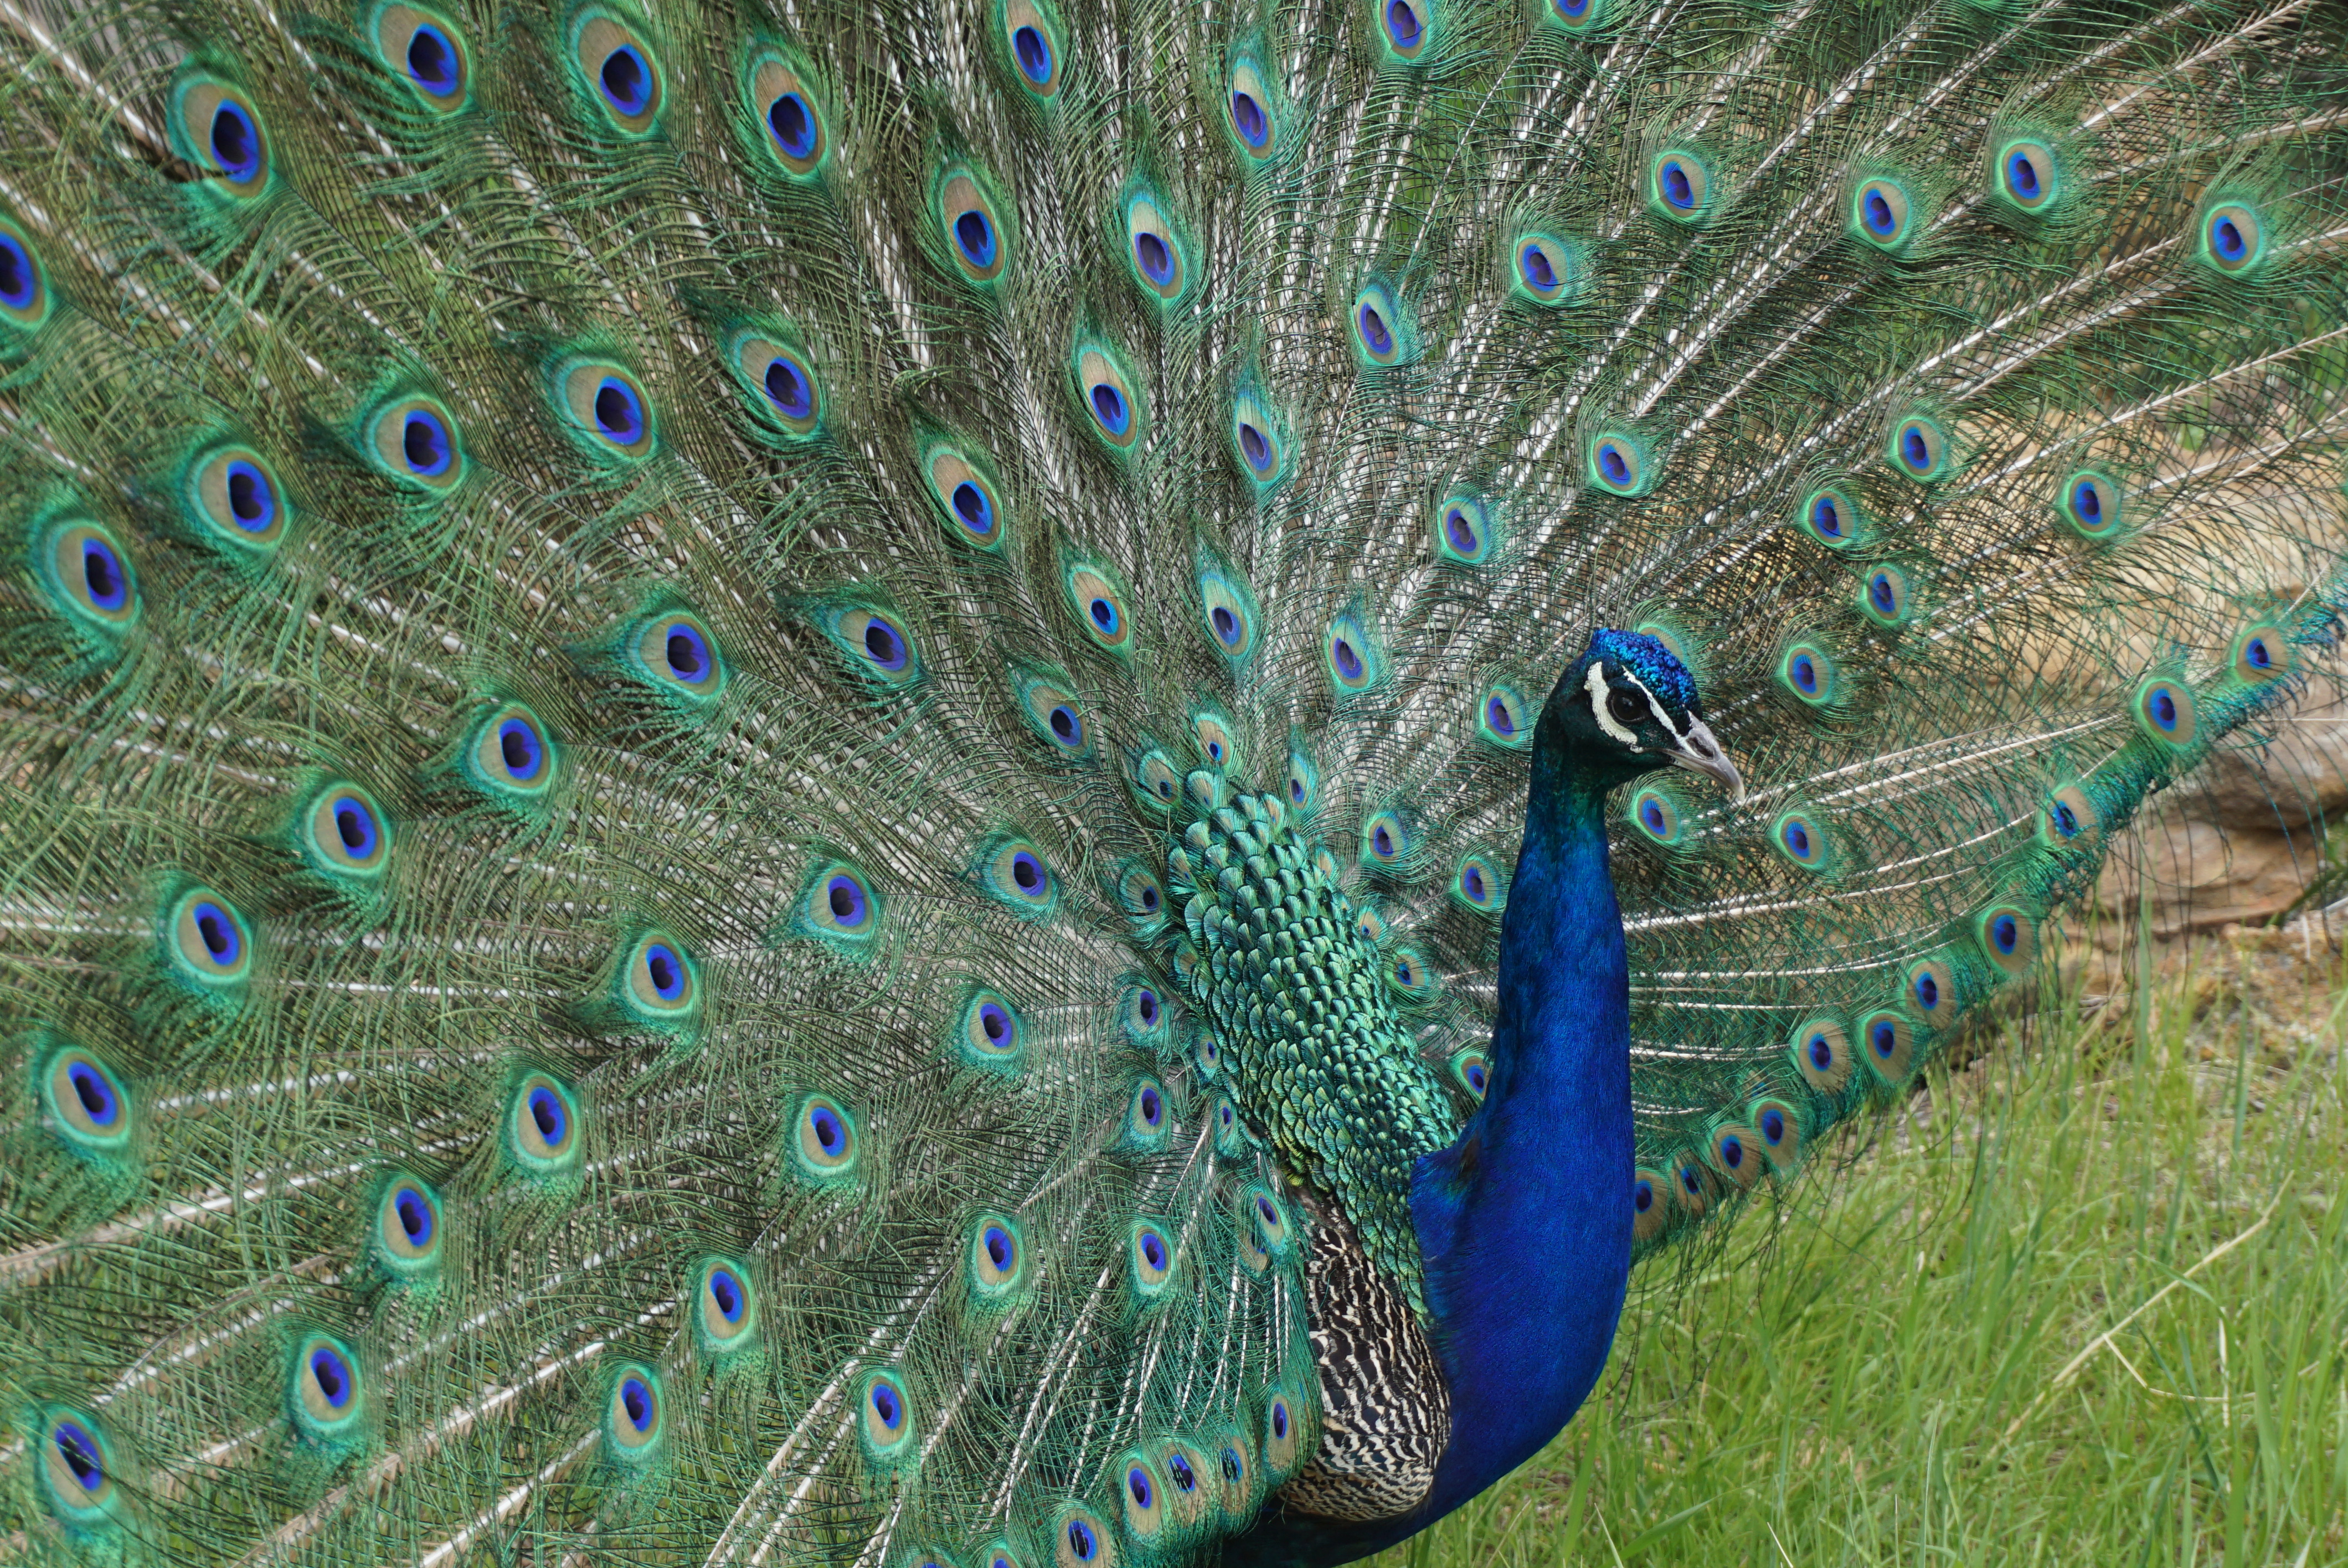 Peacock male with feather's fanned